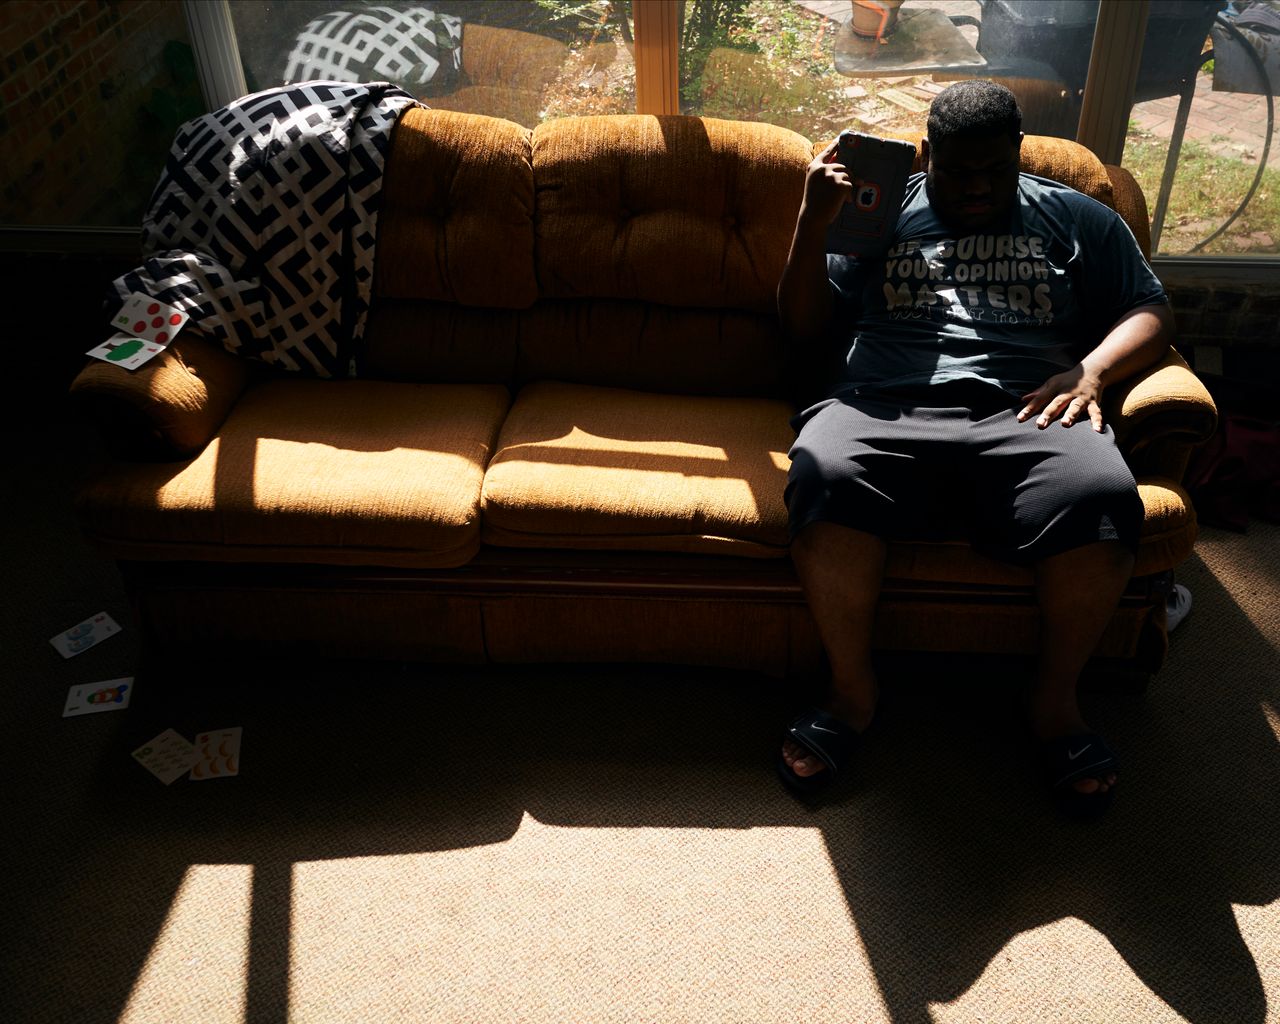 J.H. listens to music on his iPad in the sunroom at his home in Shreveport, Louisiana, on Aug. 25, 2019.